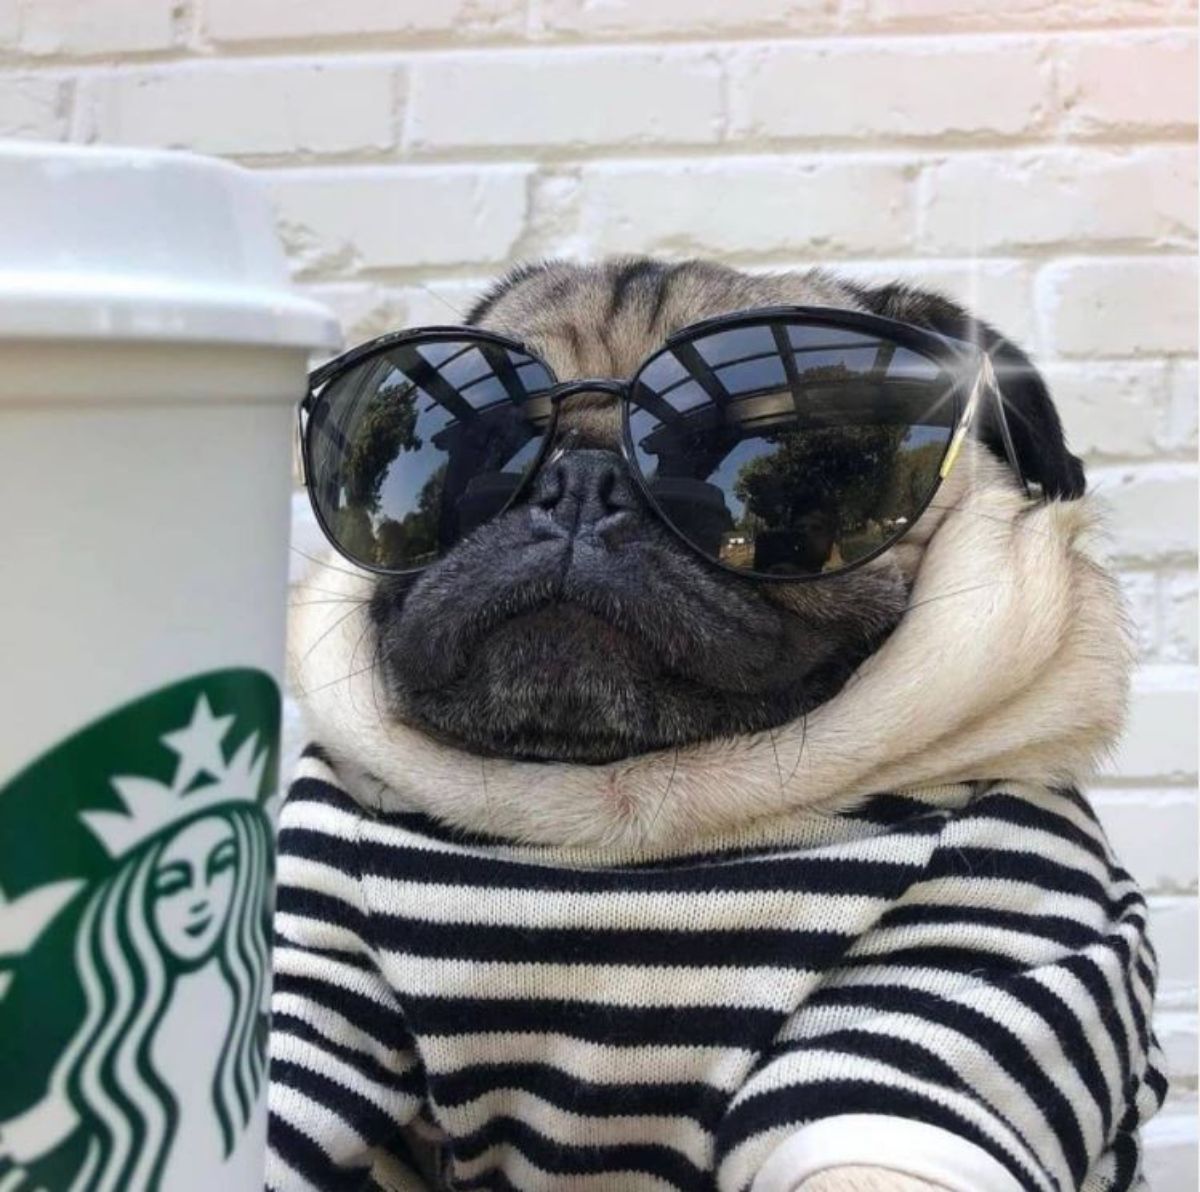 pug wearing sunglasses and striped shirt behind a Starbucks coffee